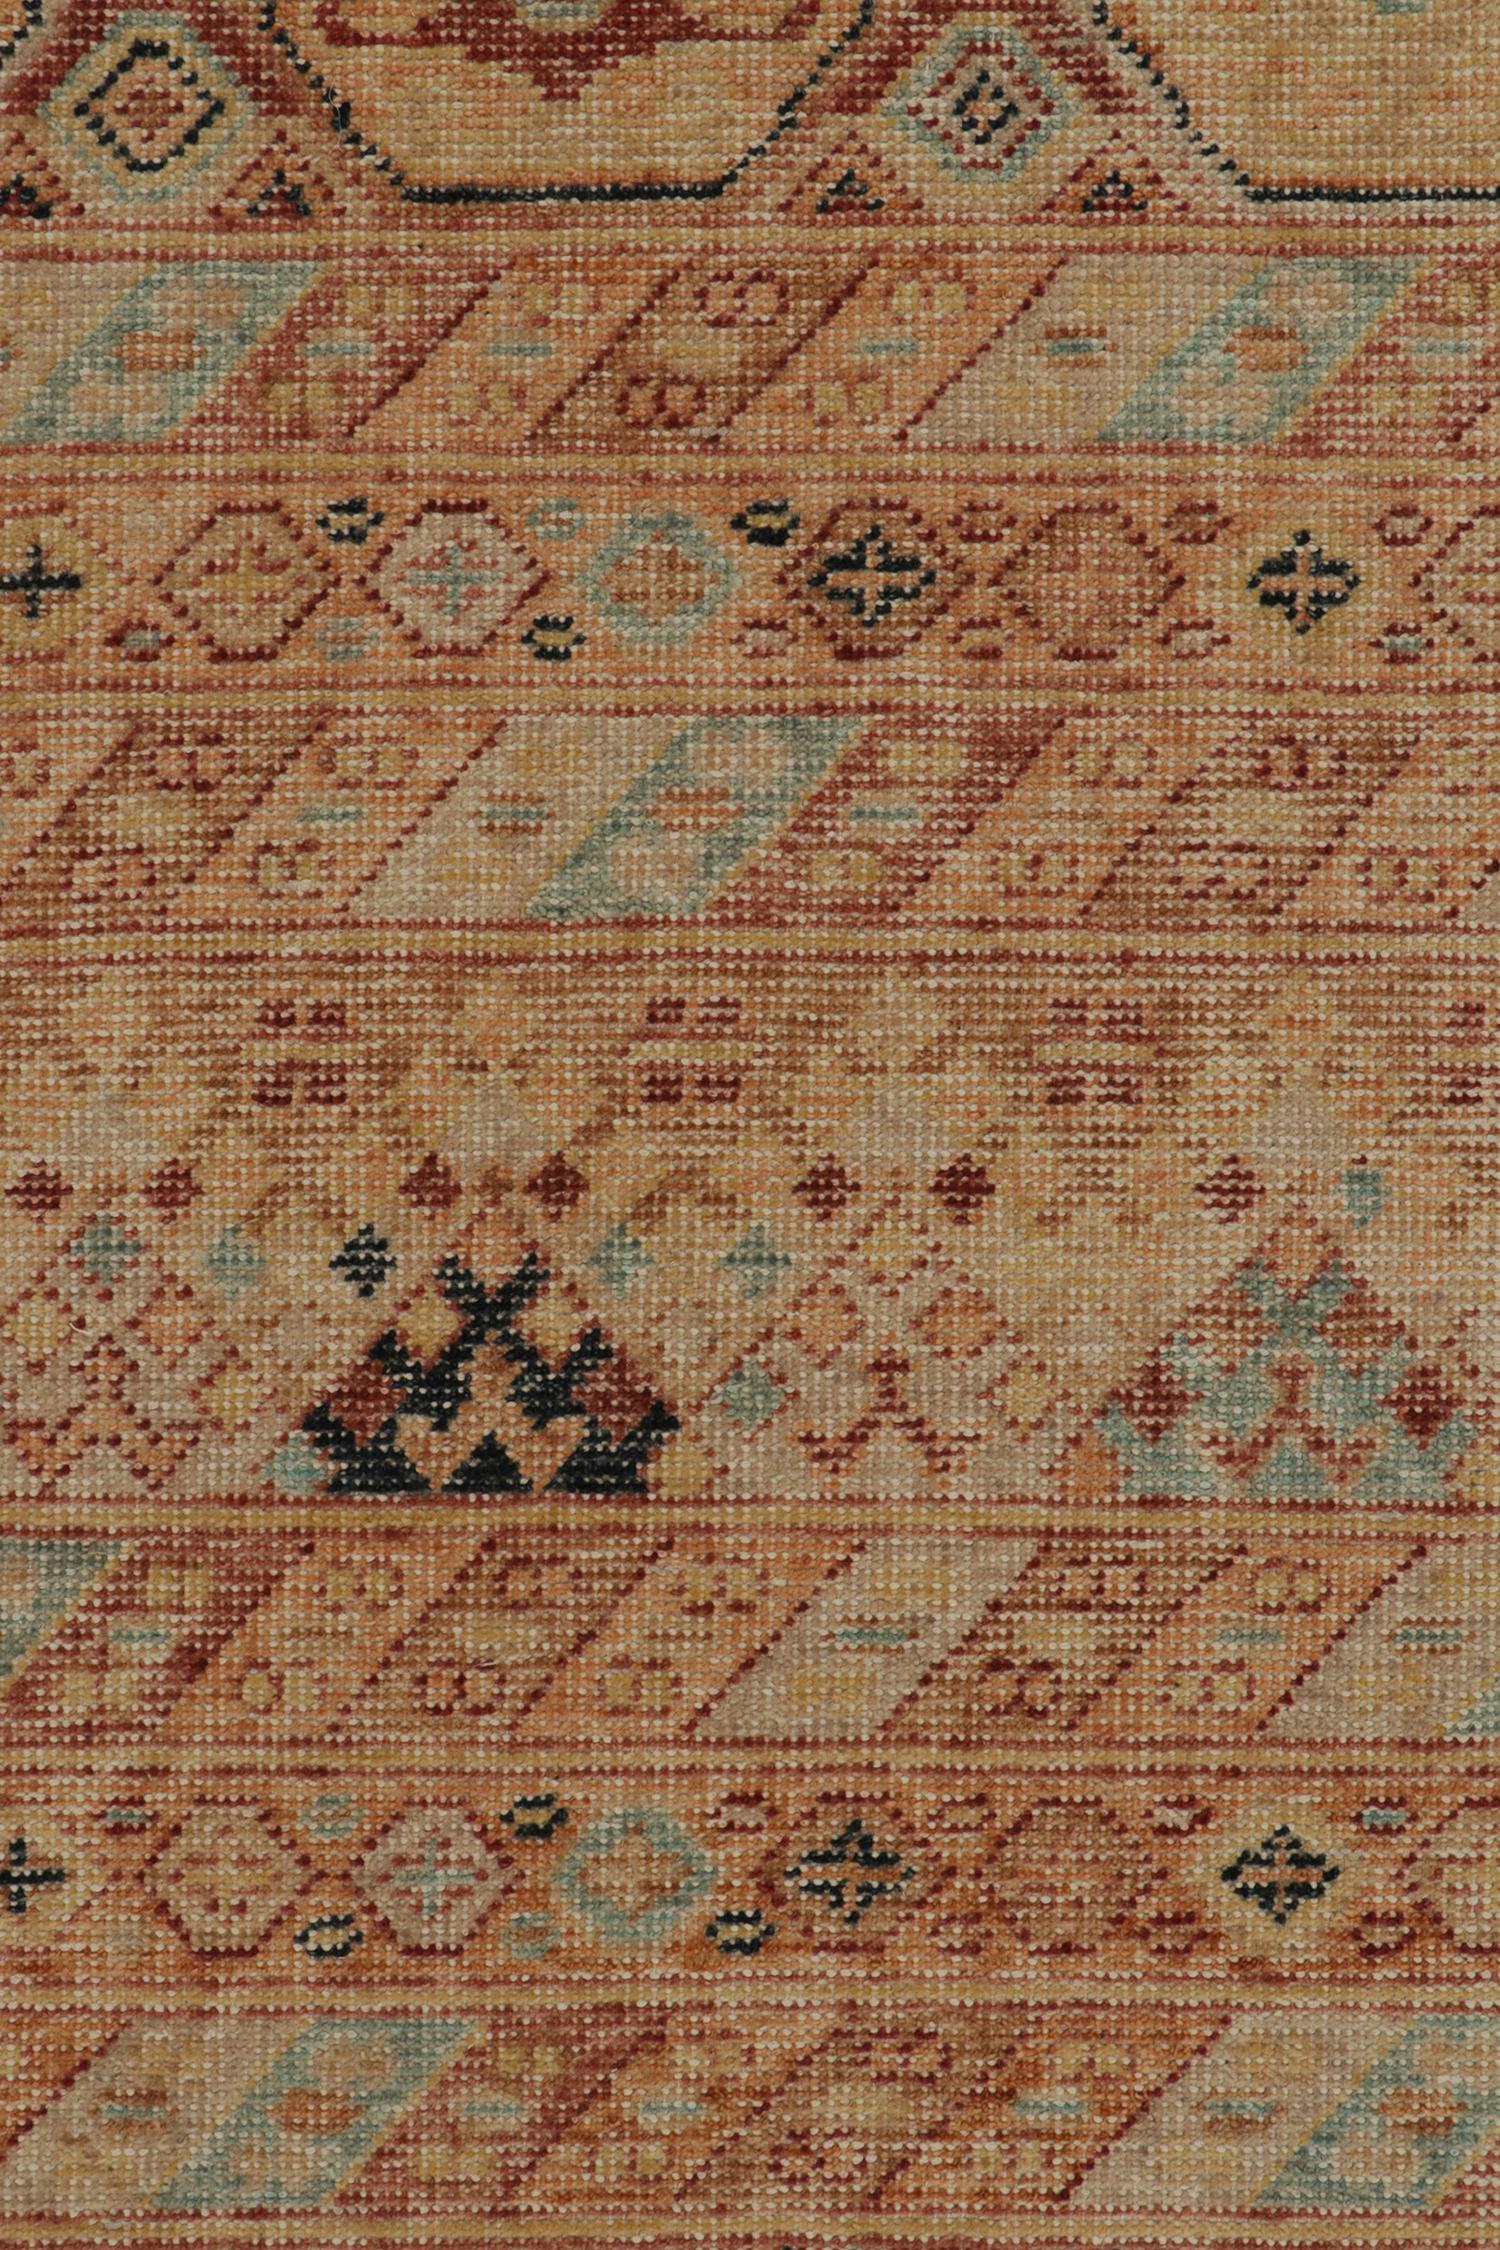 Contemporary Rug & Kilim’s Distressed Style Rug in Rust, Red and Blue Tribal Patterns For Sale